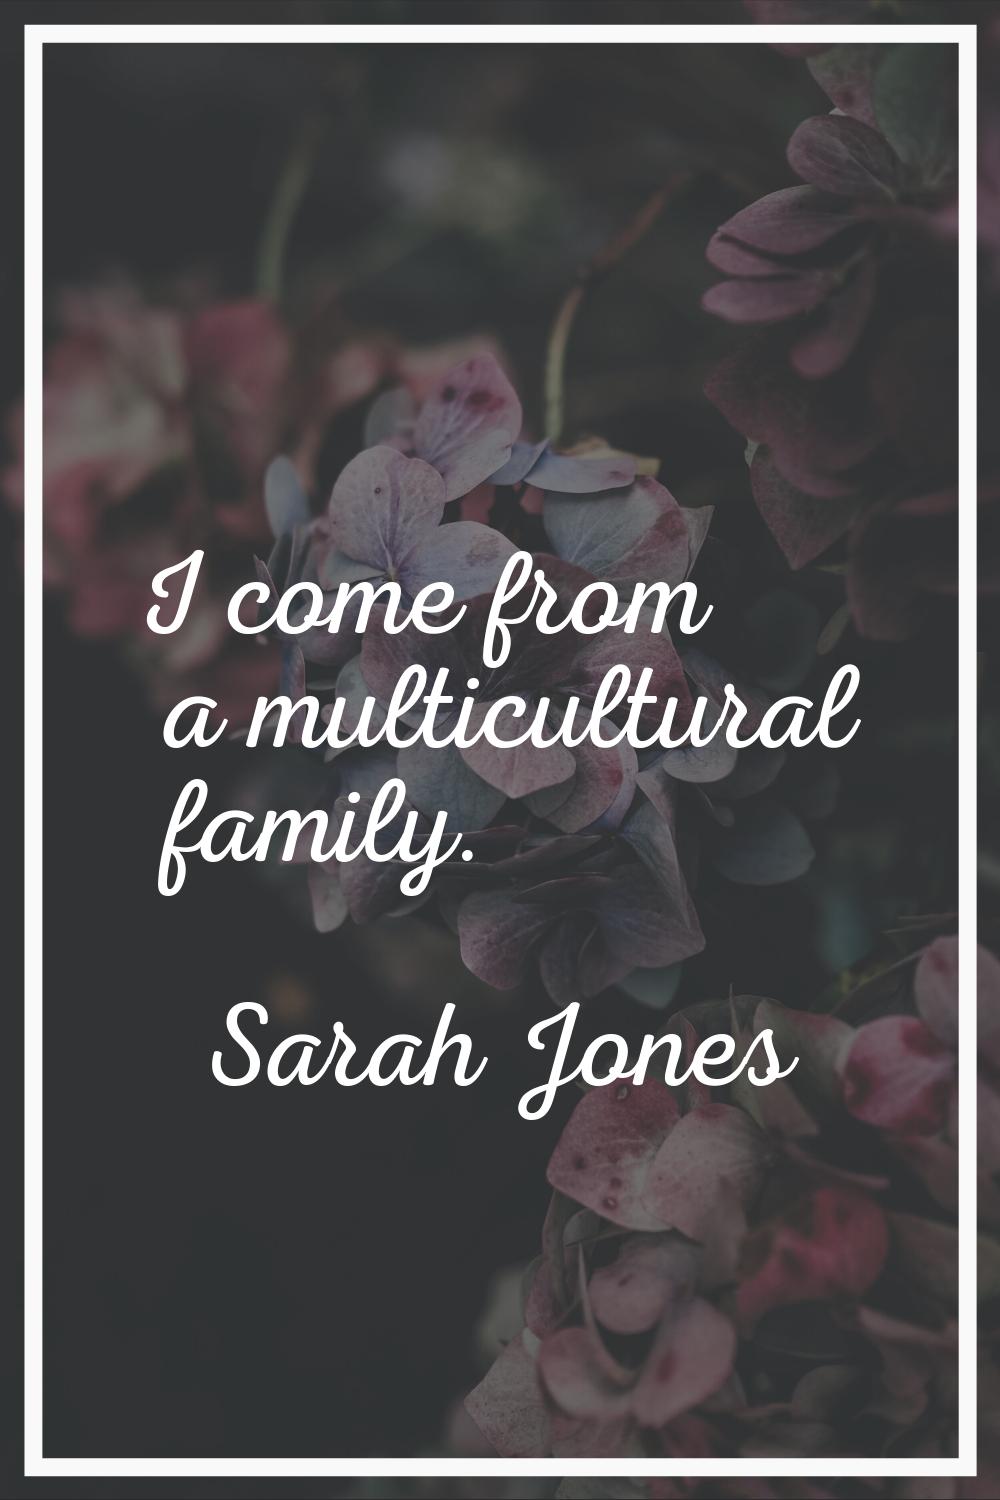 I come from a multicultural family.